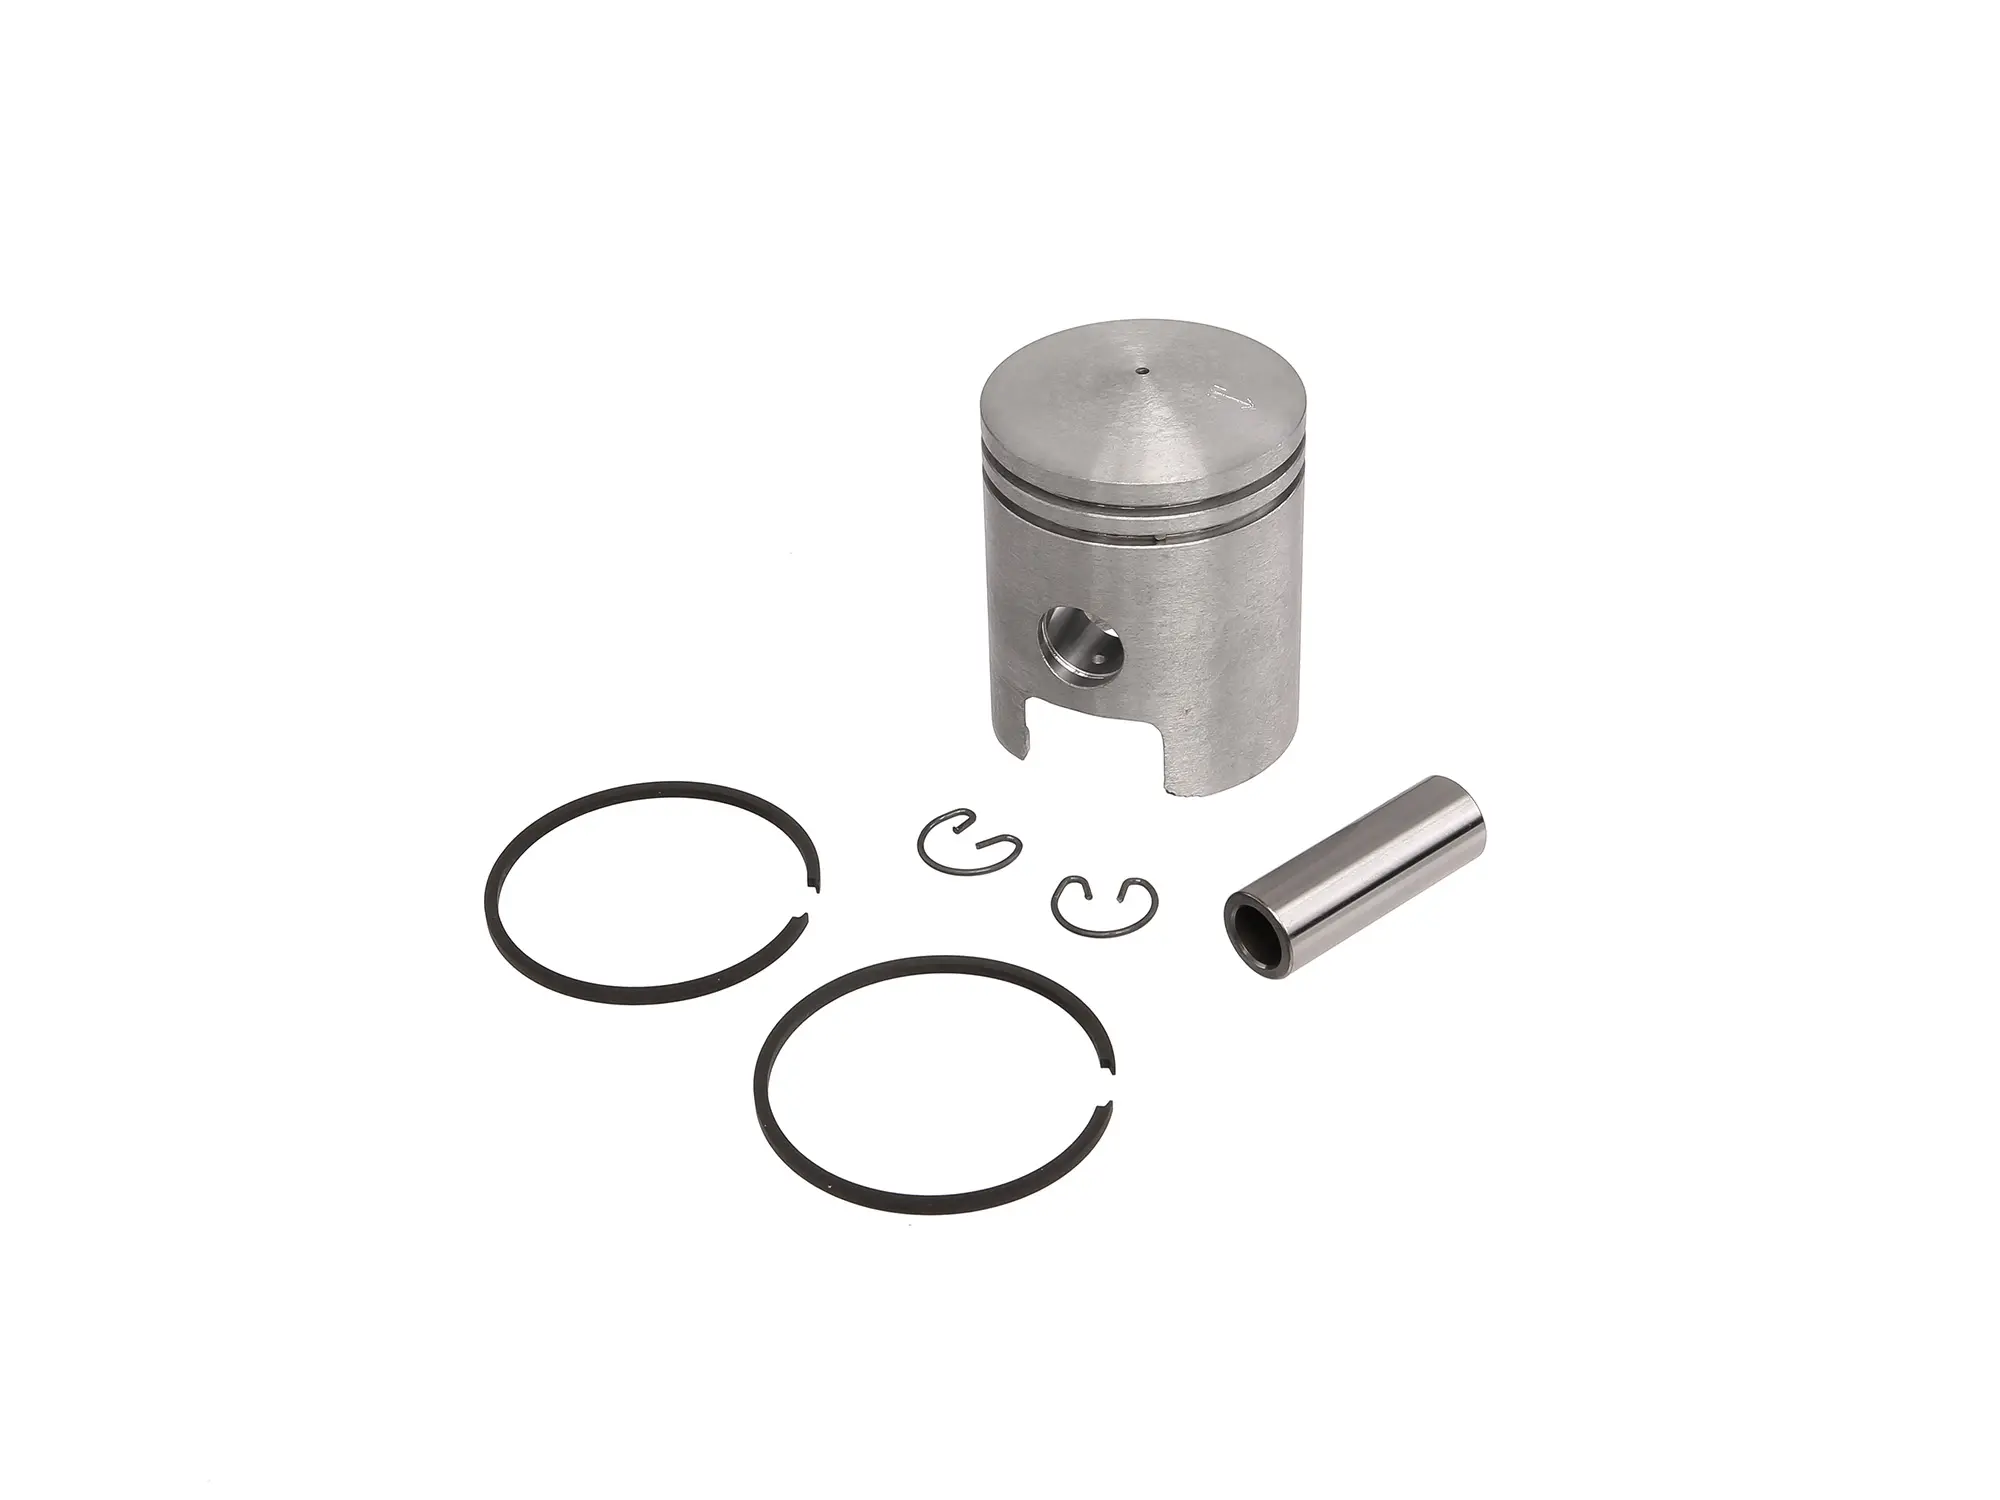 Piston for cylinder Ø53,50 - MZ TS125, ES125, ETS125 - RT125 (15 mm piston pin), Item no: 10005314 - Image 1